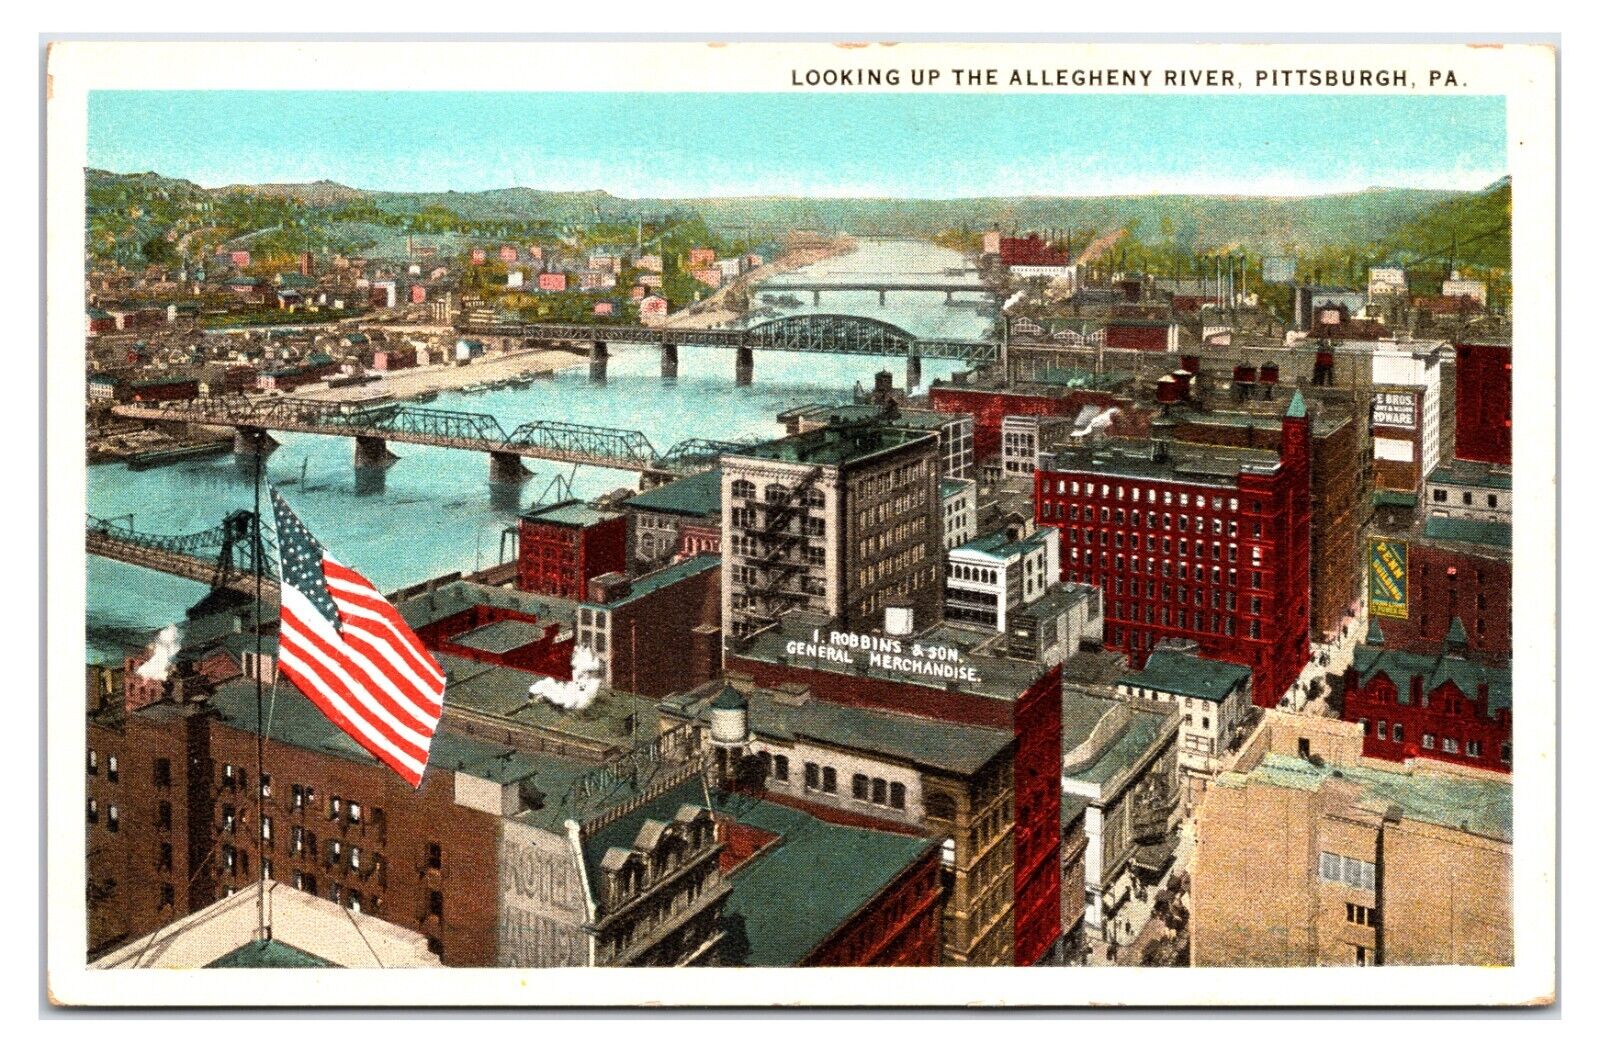 VTG 1920s - Allegheny River View - Pittsburgh, Pennsylvania Postcard (UnPosted)